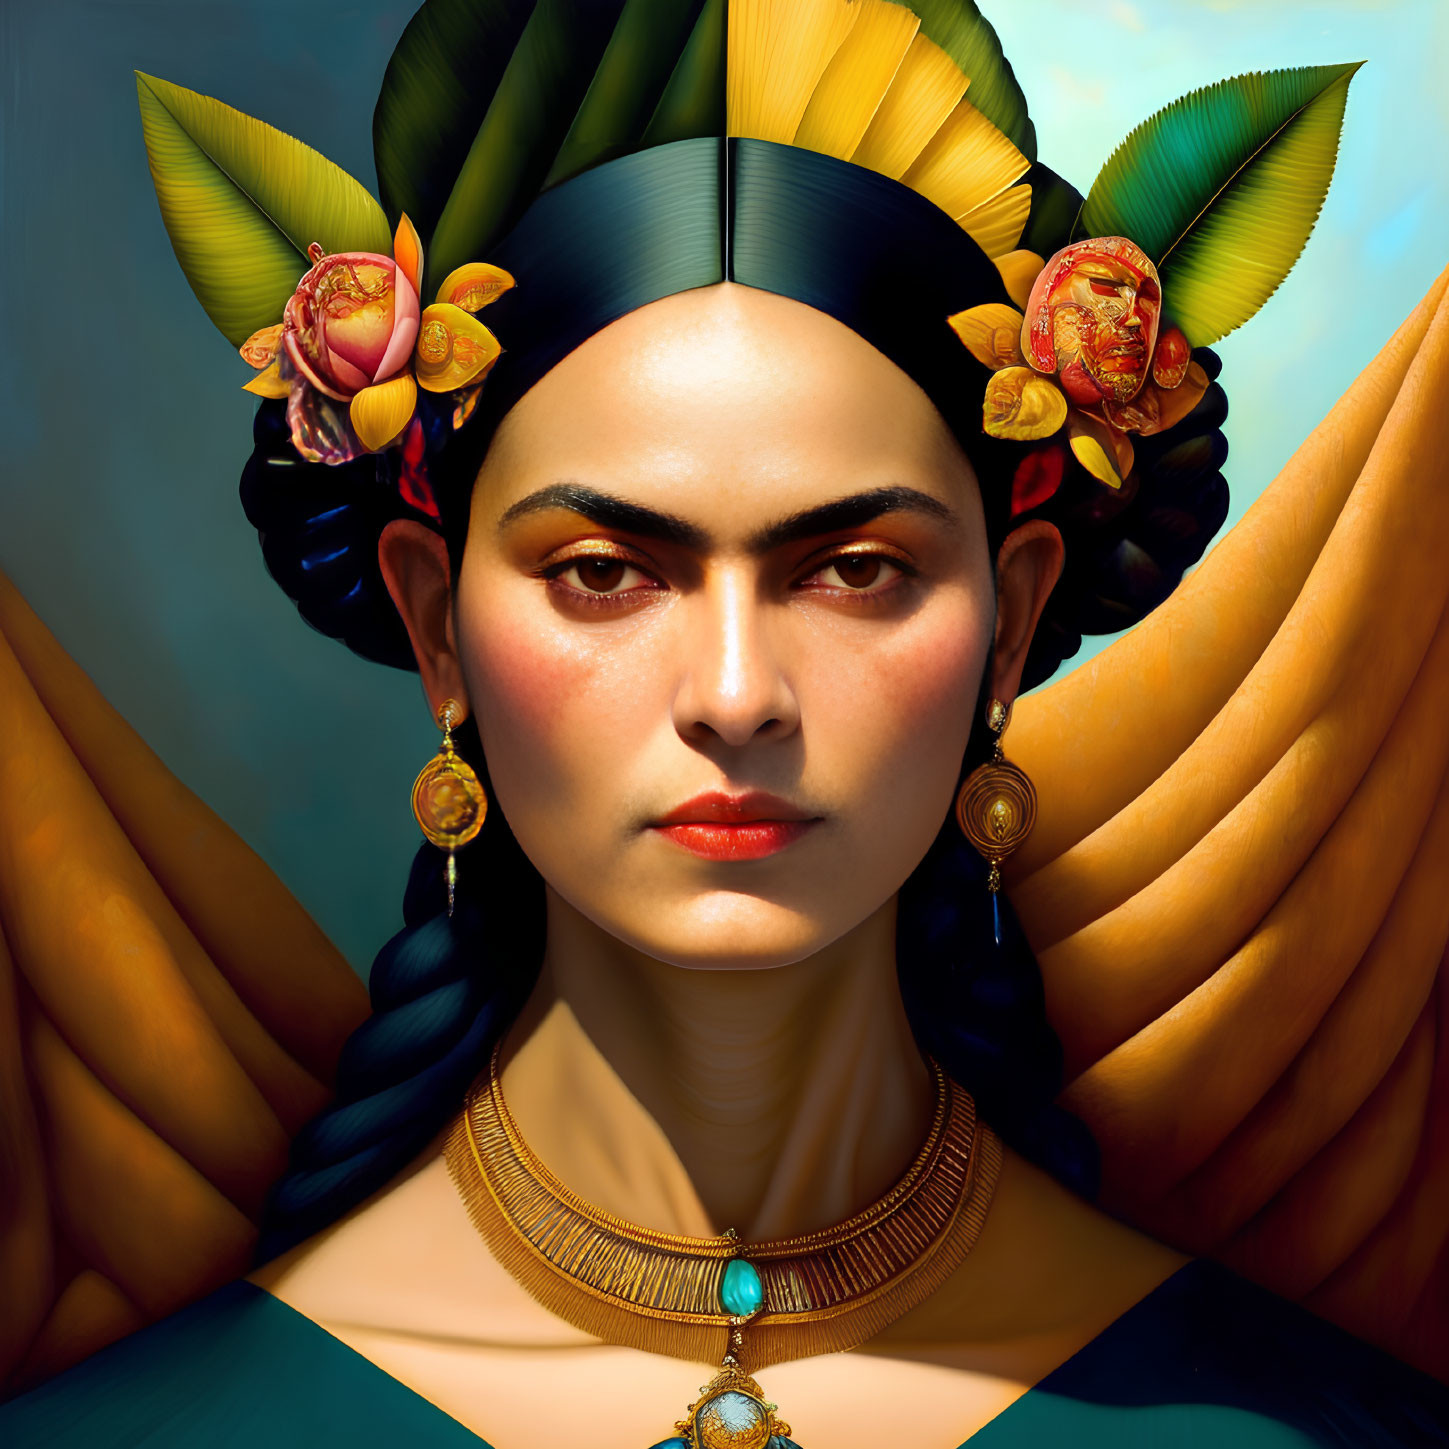 Stylized portrait of woman with unibrow, headband, flowers, large earrings, and